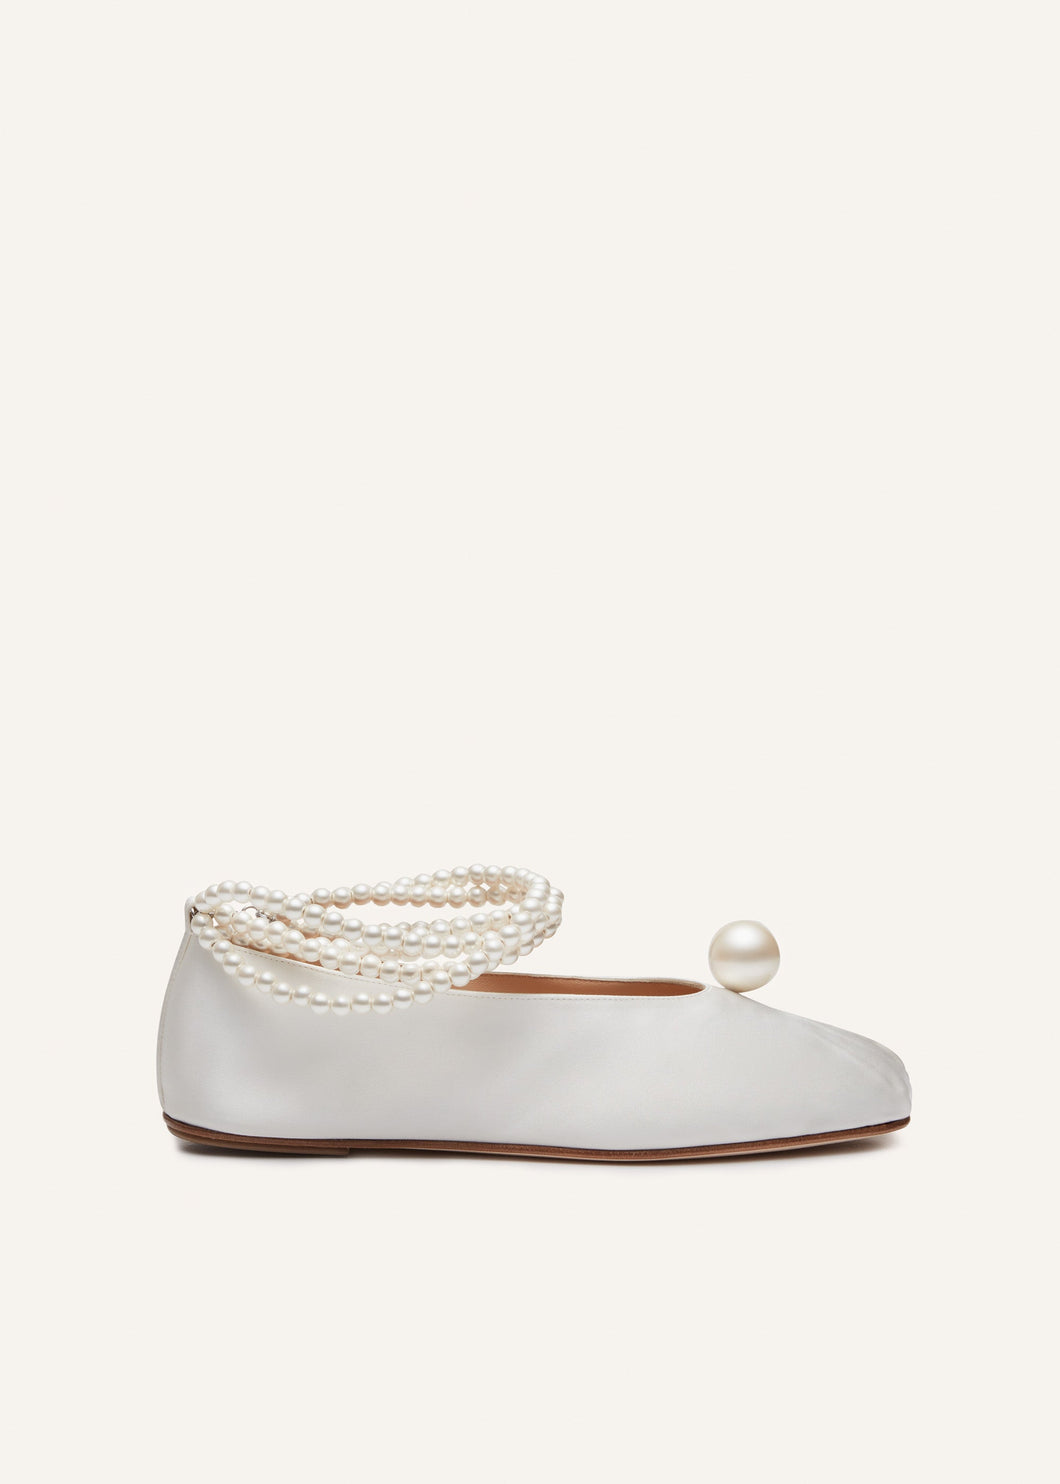 Mother of pearl ballet flats in cream satin